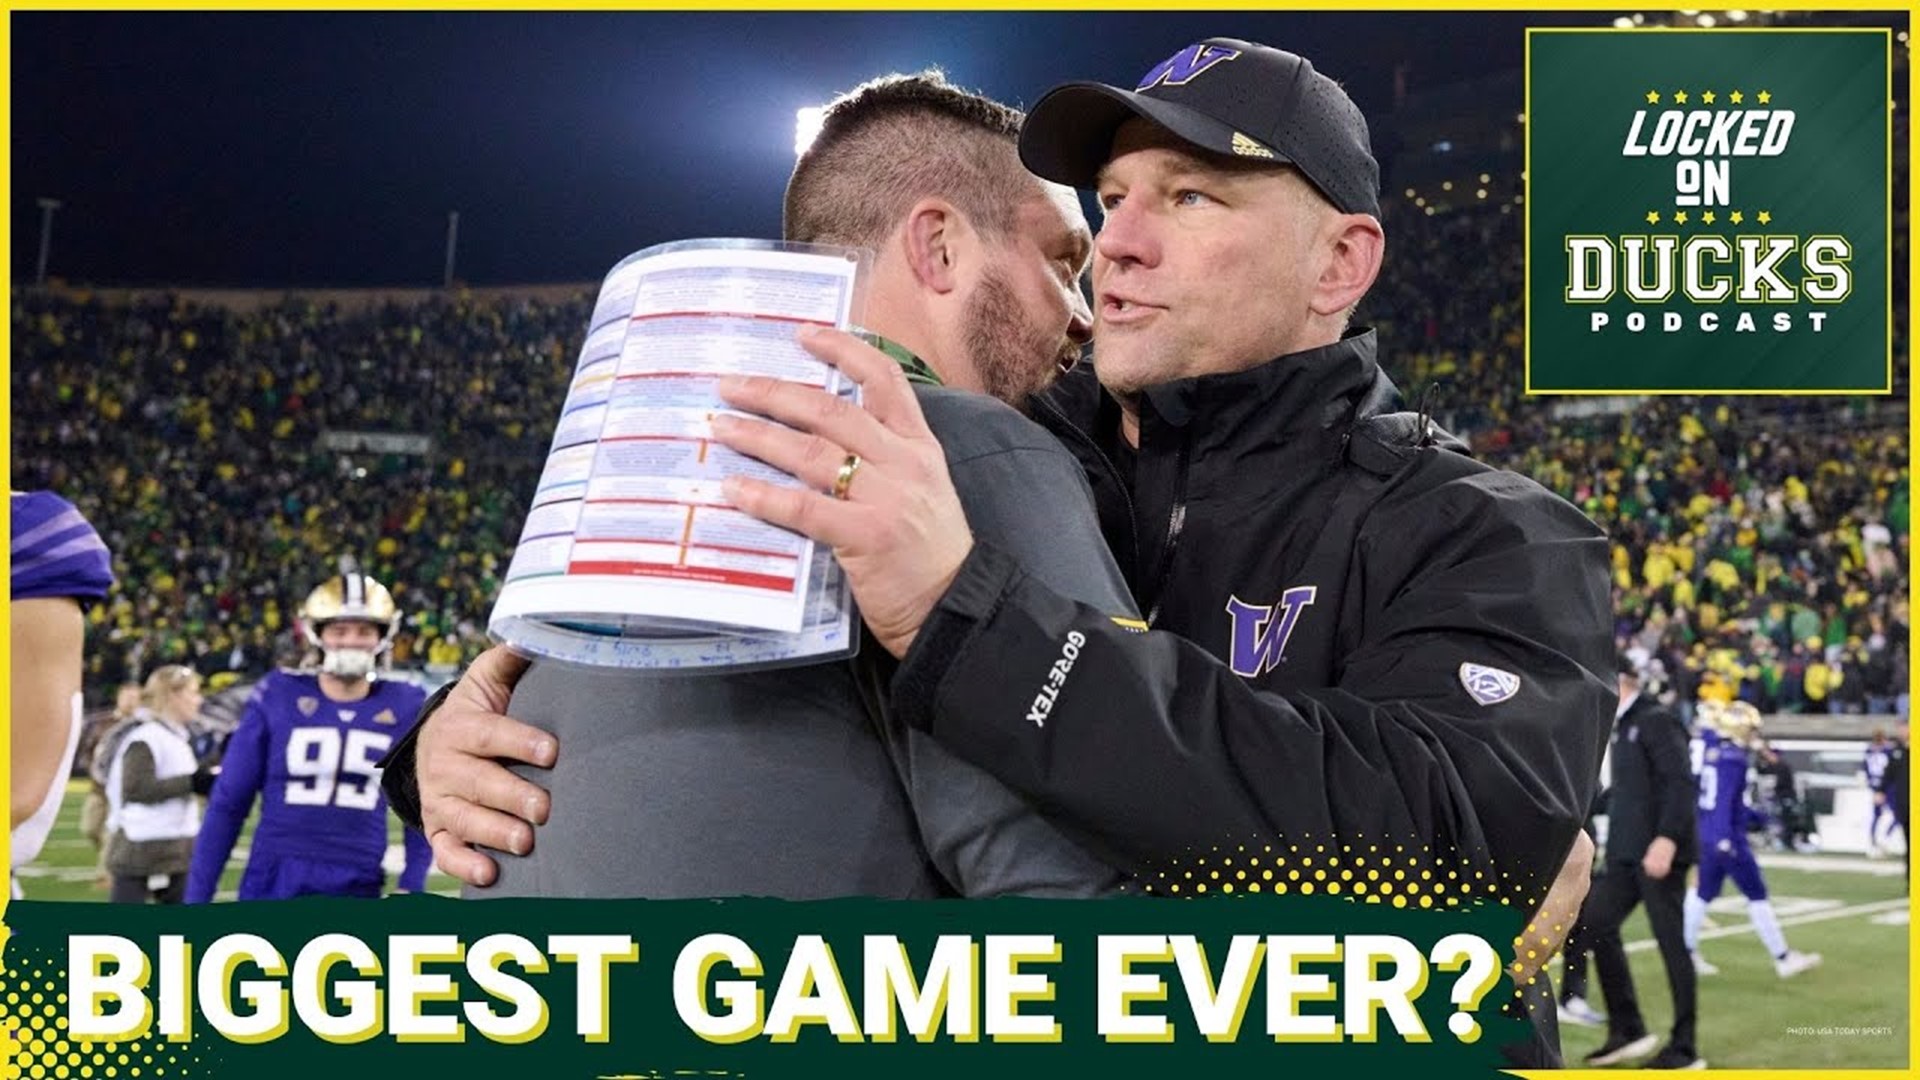 Oregon fans have waited almost a year for this week, a chance for revenge against the Washington Huskies. Now, game week is here and it's the biggest matchup ever